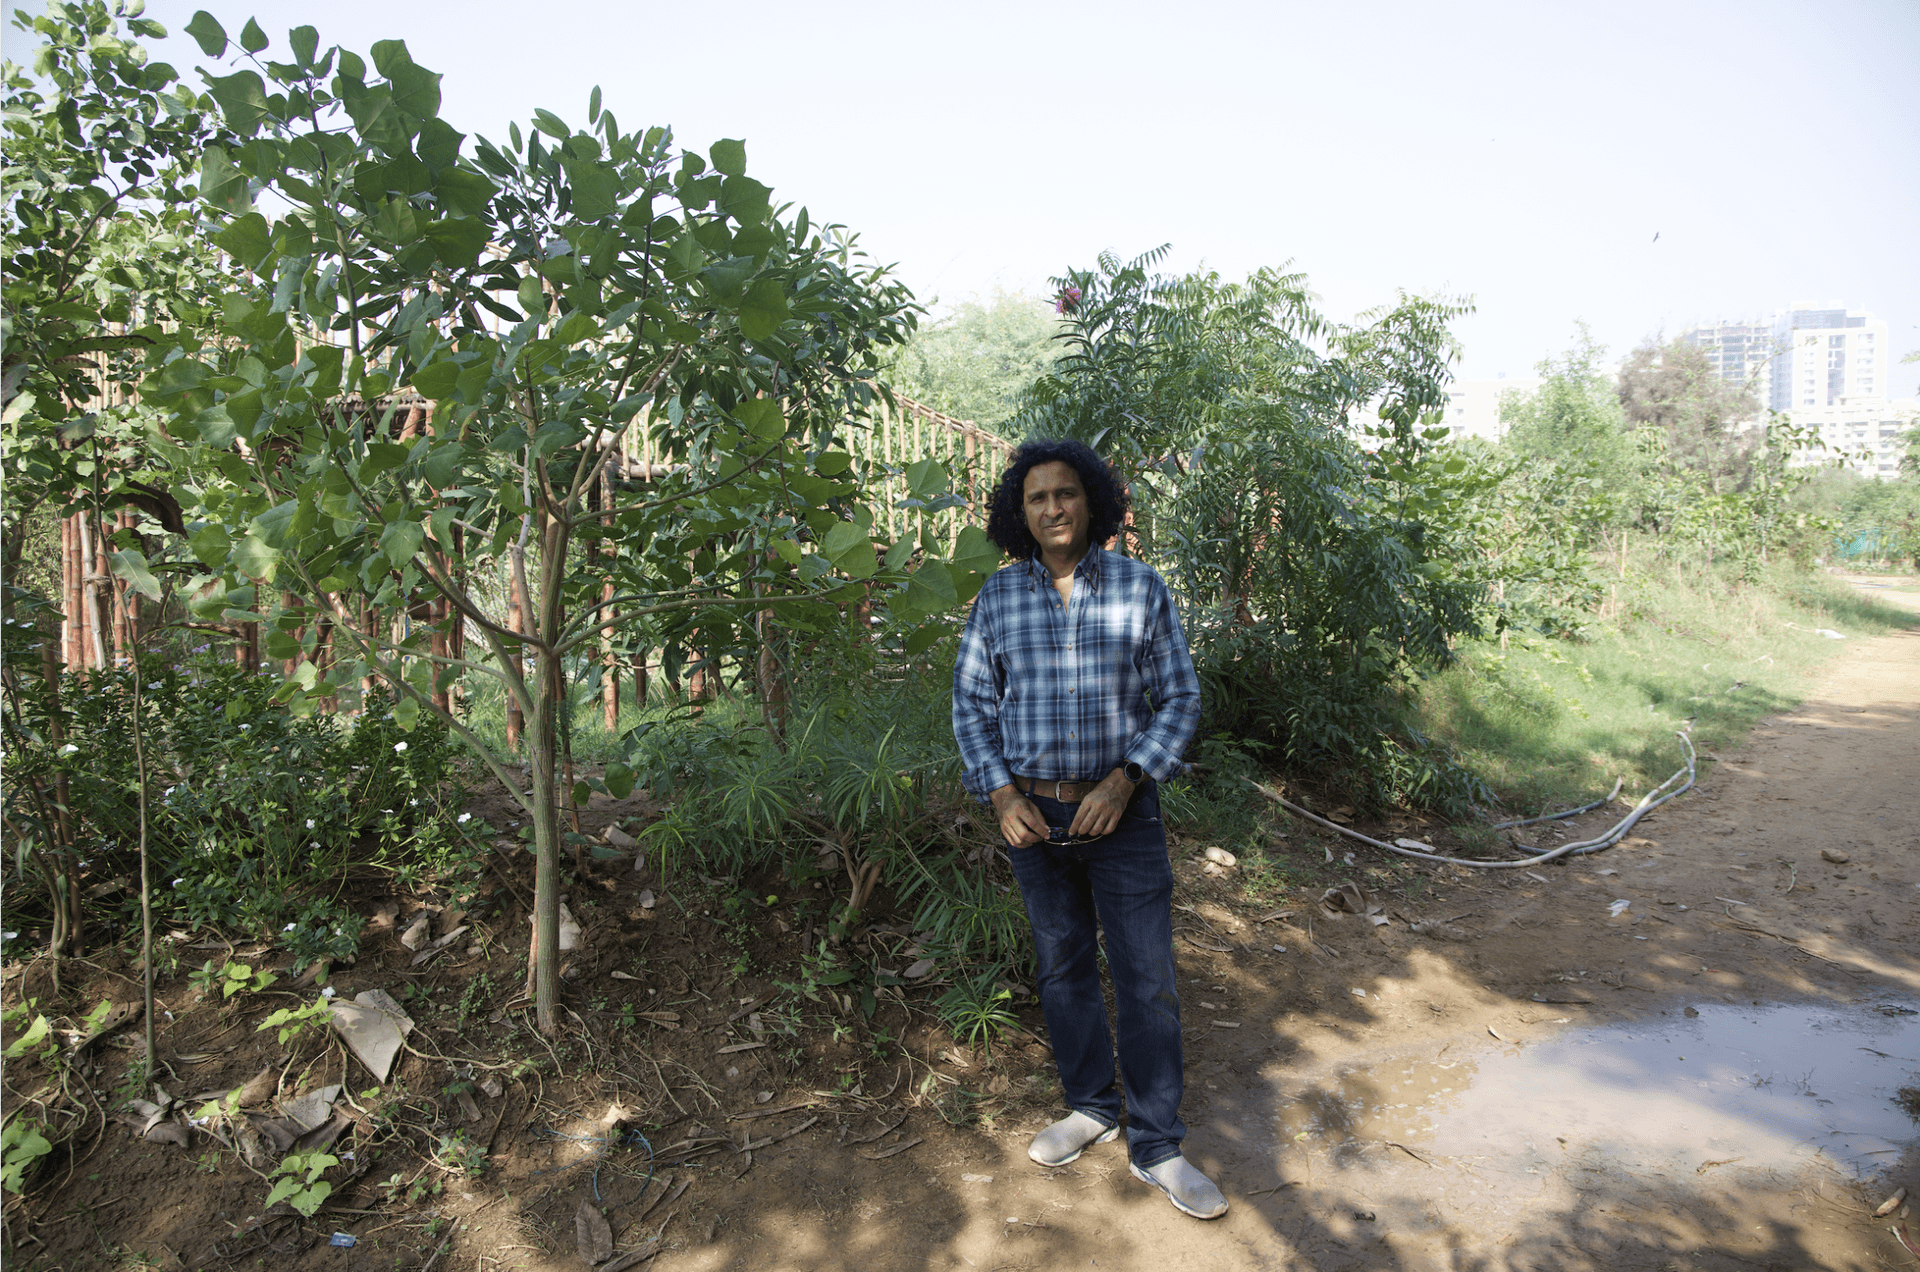 Shahzad Qureshi at his first urban forest, in the Clifton neighborhood of Karachi, Pakistan.